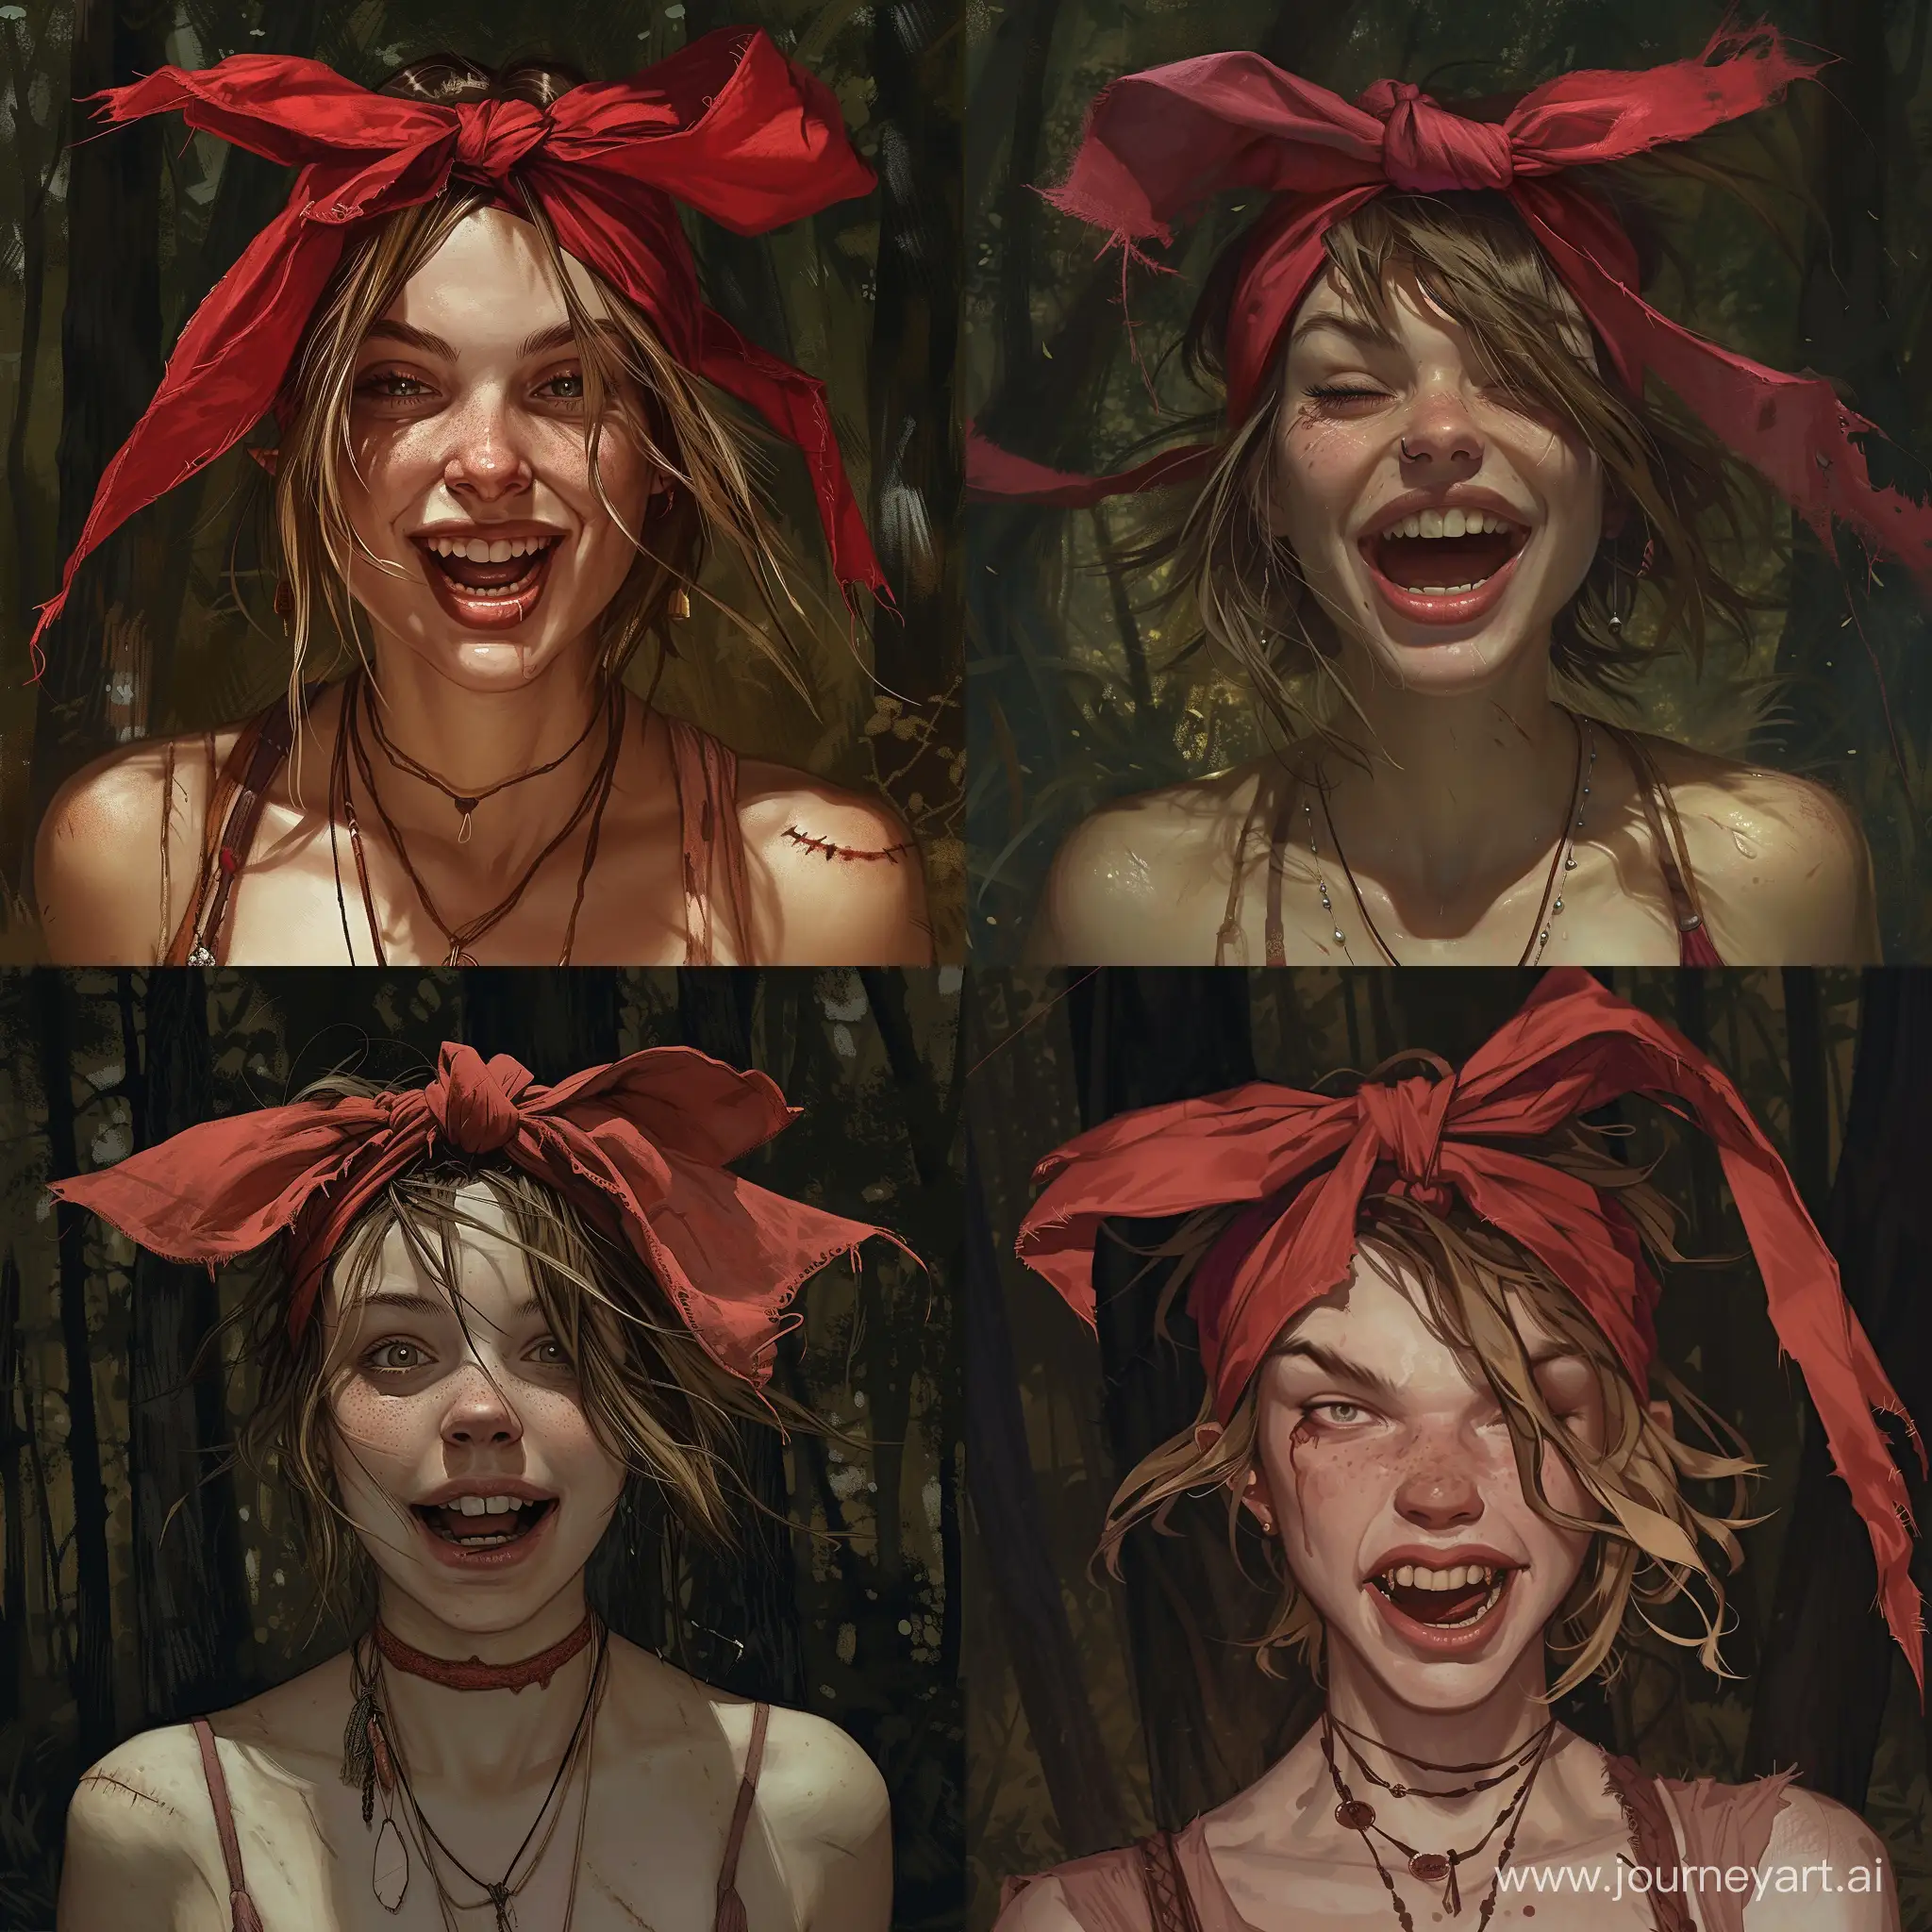 A witch with woman wiyh crazy laugh wearing a red headband tied in a bow on the top of their head. They have light brown hair that is pulled back and messy, with strands sticking out around the headband. The background is a dark forest. The person's shoulders and upper chest are visible; they appear to be wearing a tank top or similar garment with thin straps. There are some necklaces around the person’s neck, adding detail to the otherwise simple presentation
